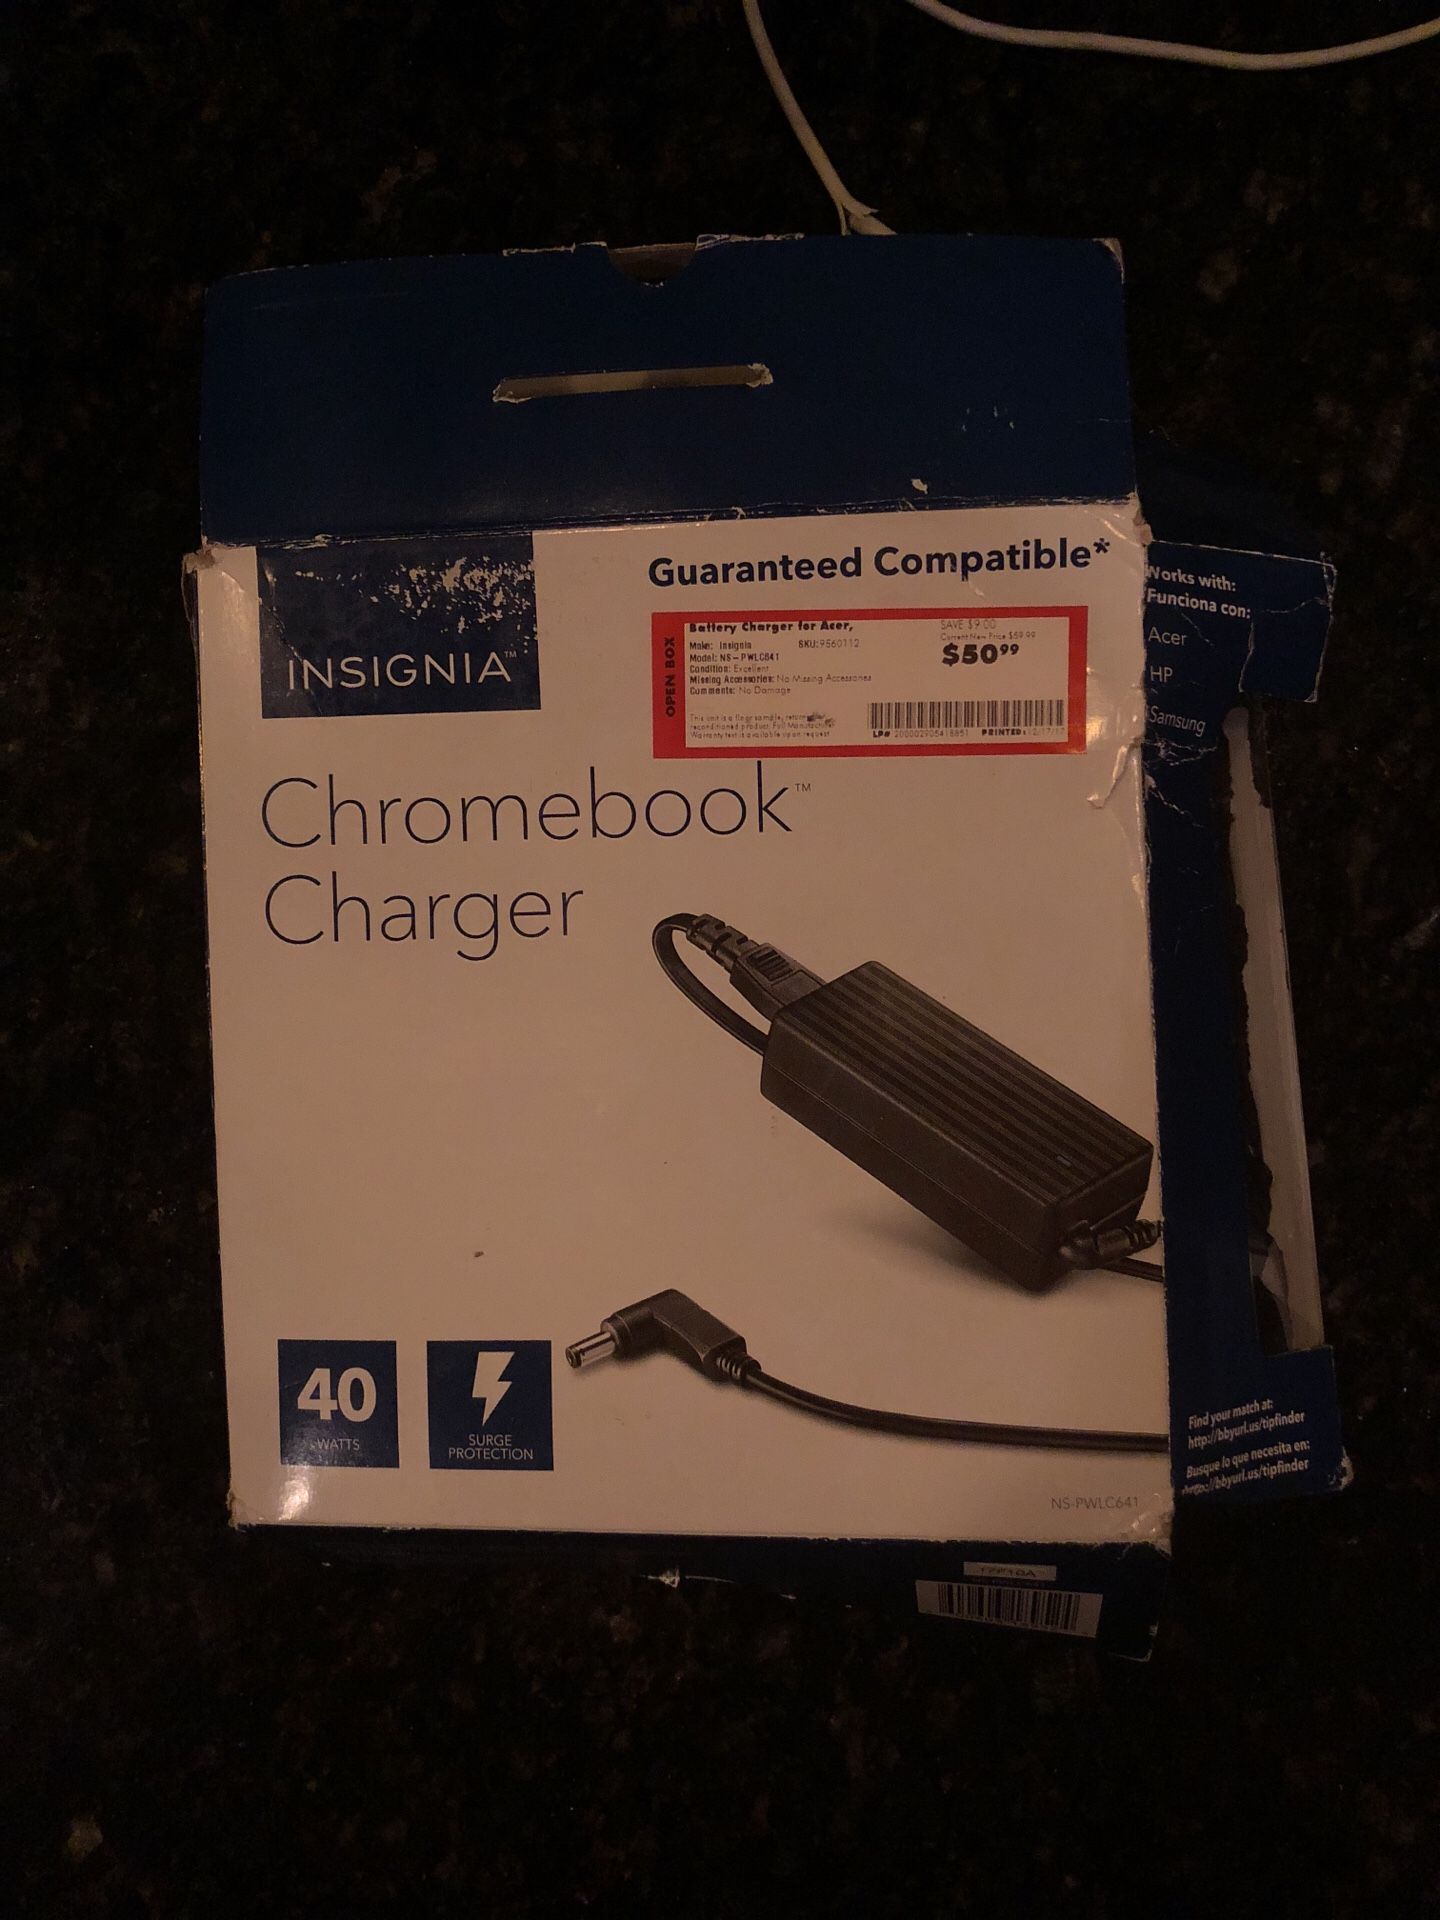 Chromebook Charger